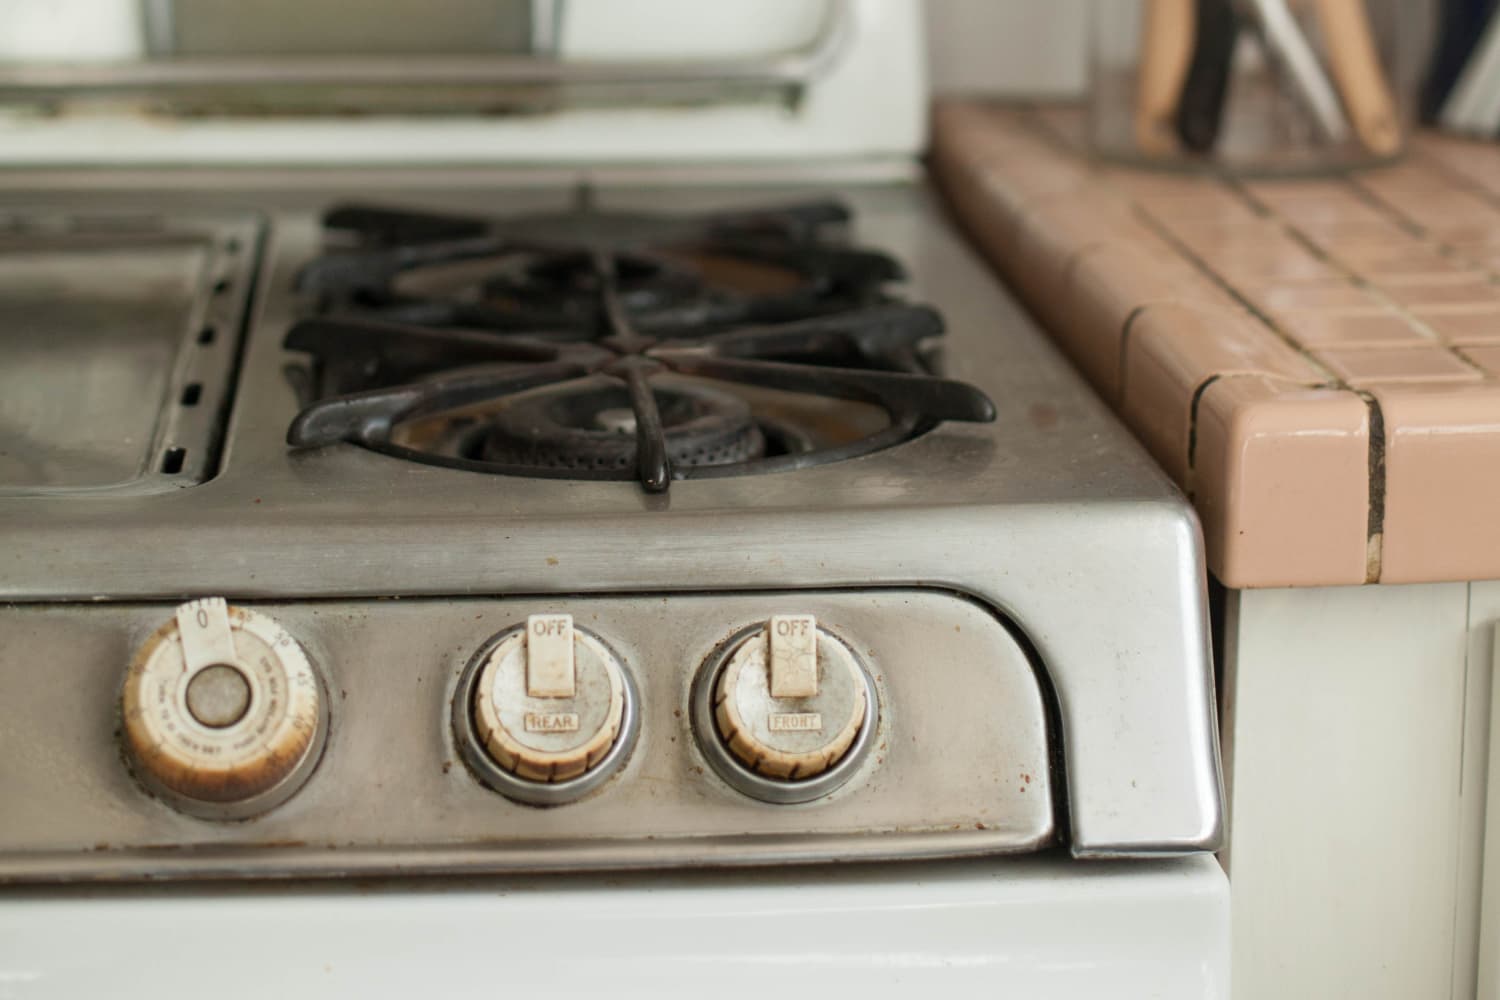 How Long Can a Landlord Leave You Without an Oven? 2